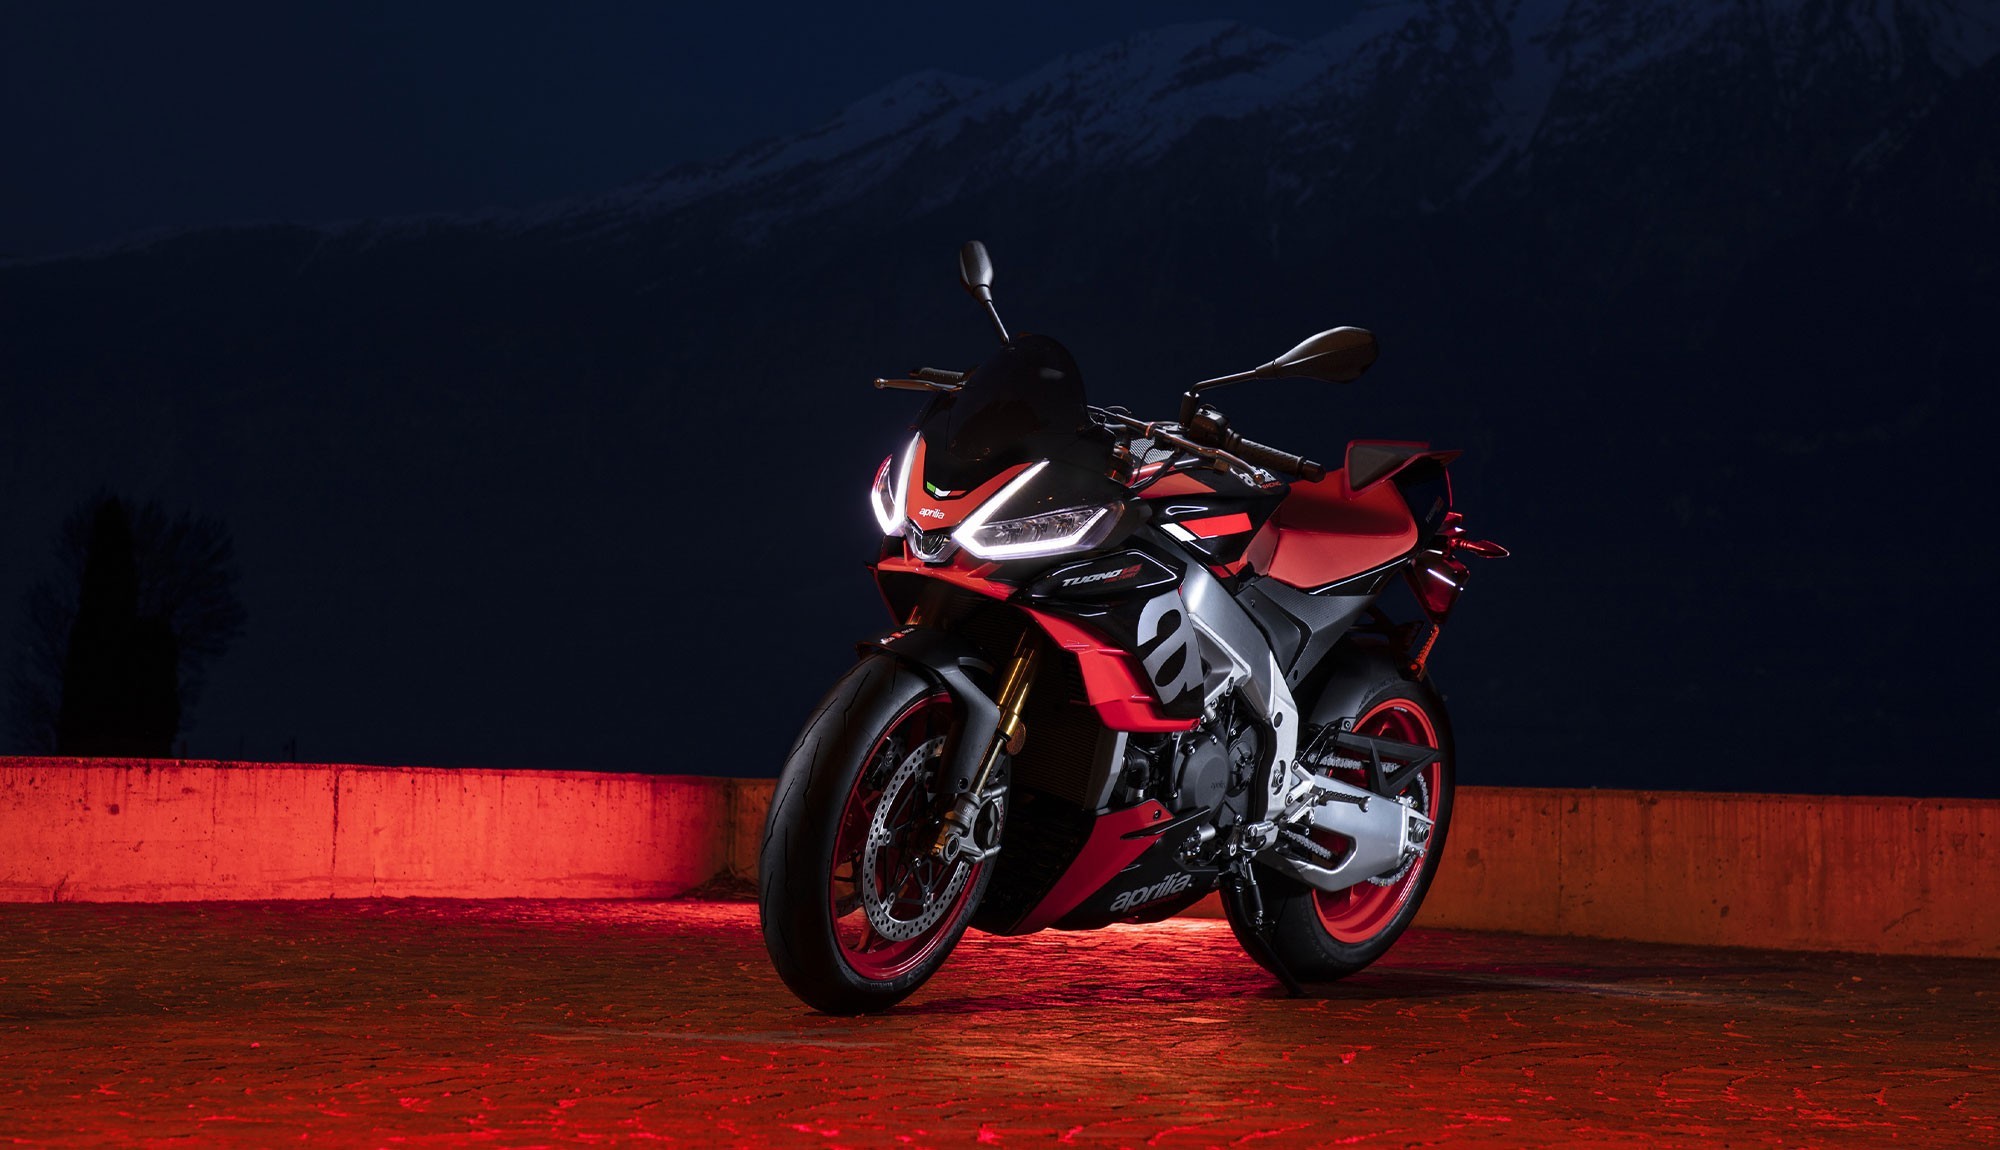 Front three quarter image of Aprilia Tuono Factory taken at night with red neon back light